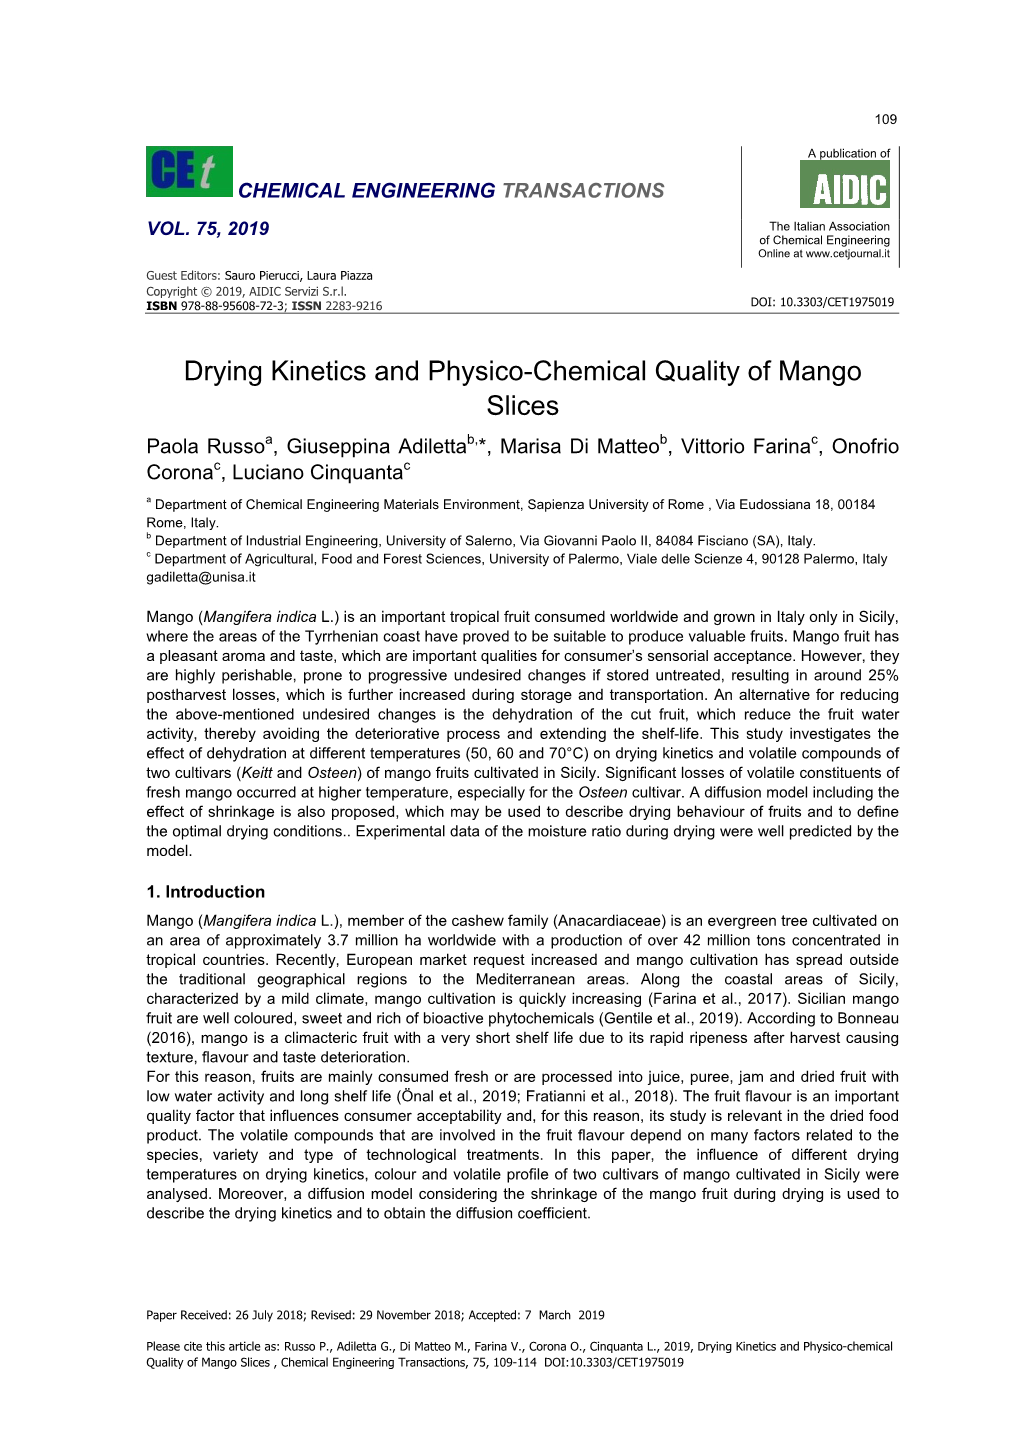 Drying Kinetics and Physico-Chemical Quality of Mango